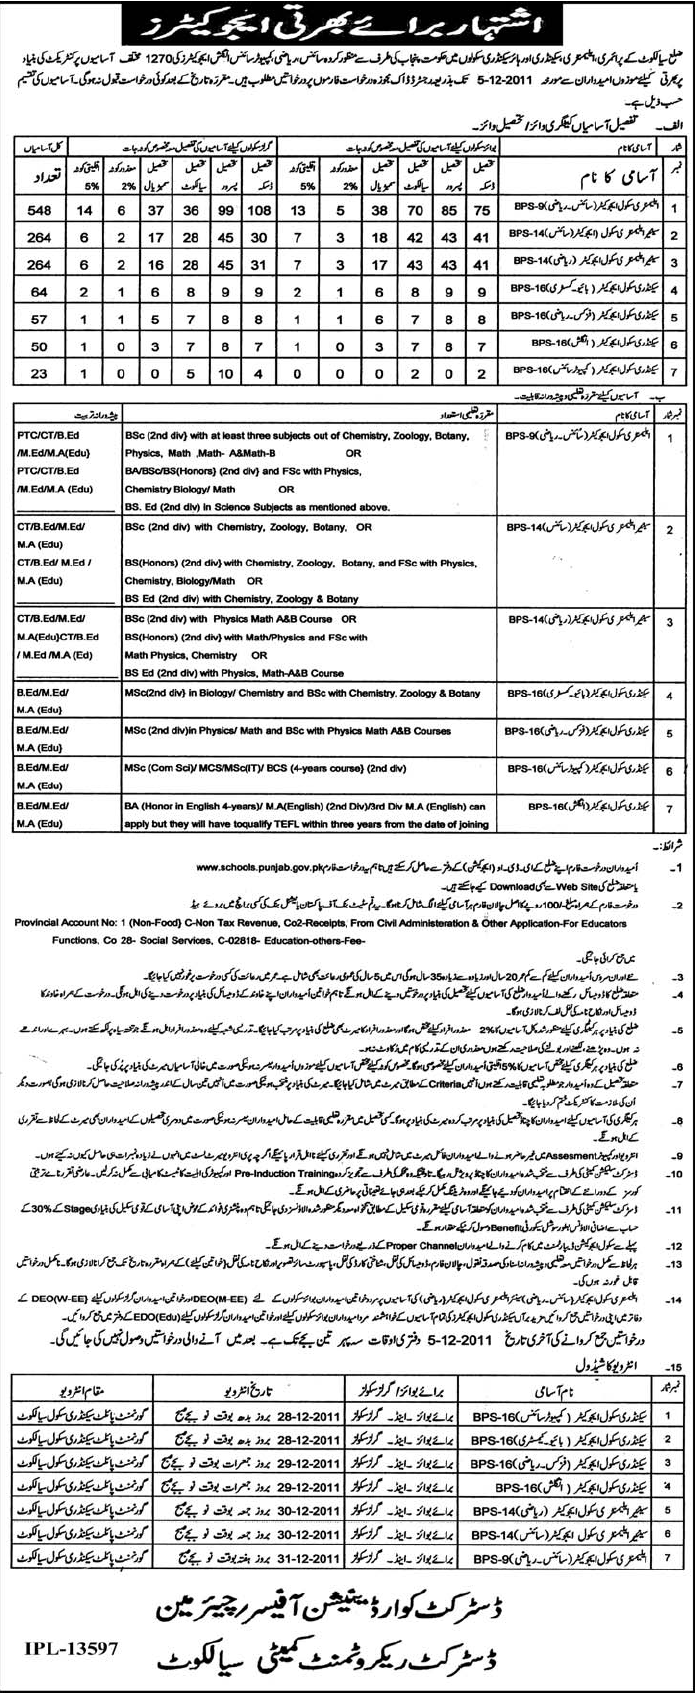 Educators Required by Government of the Punjab for District Sialkot